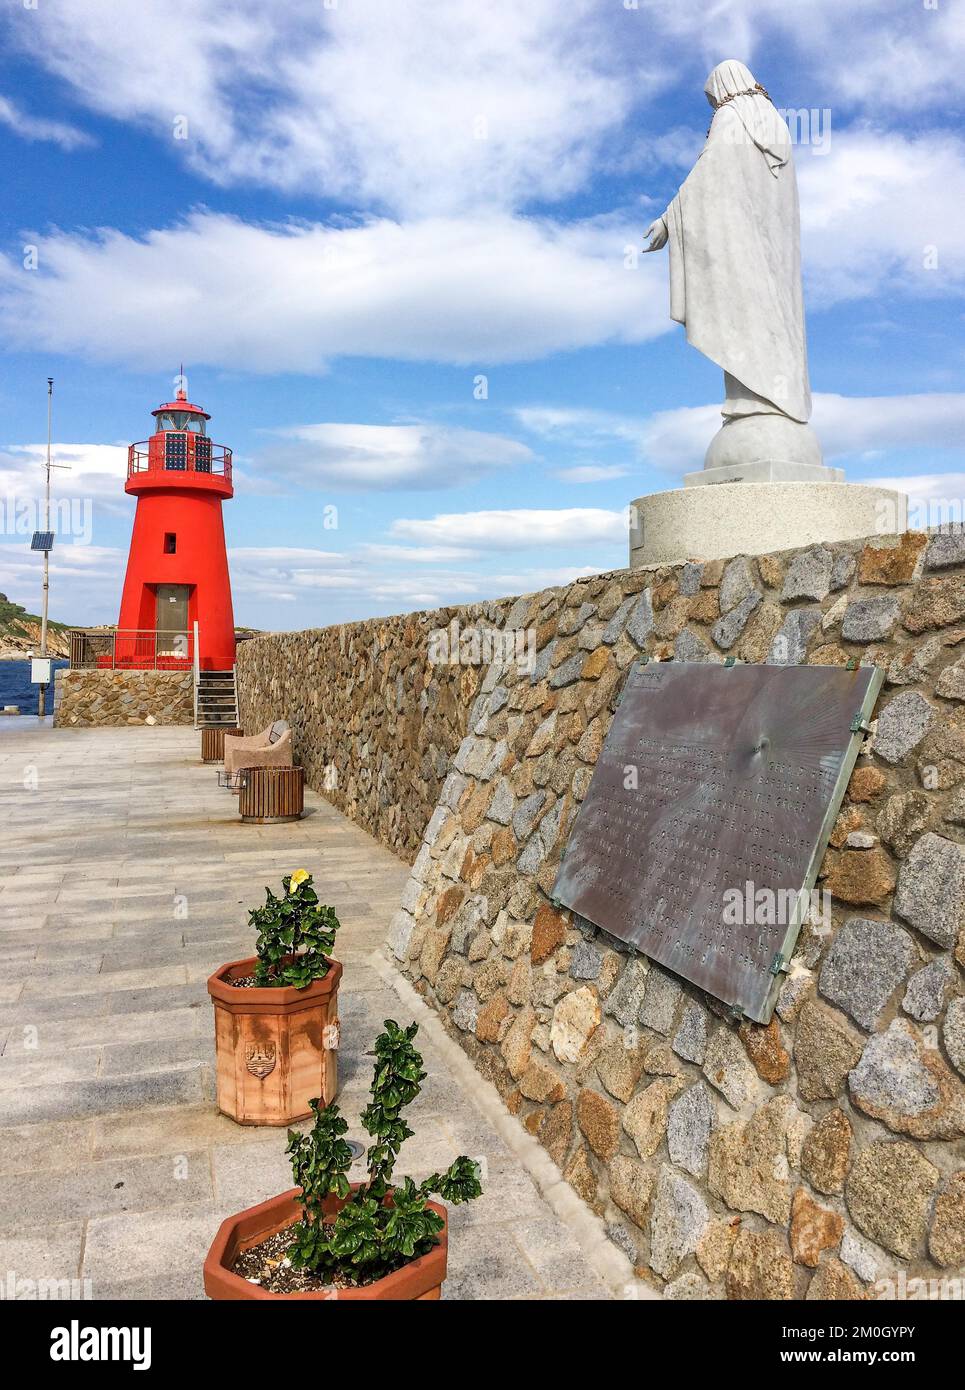 Memorial Monument with memorial plaque on the right for victims of sinking of cruise ship Ship sinking disaster Ship disaster Costa Concordia, above i Stock Photo